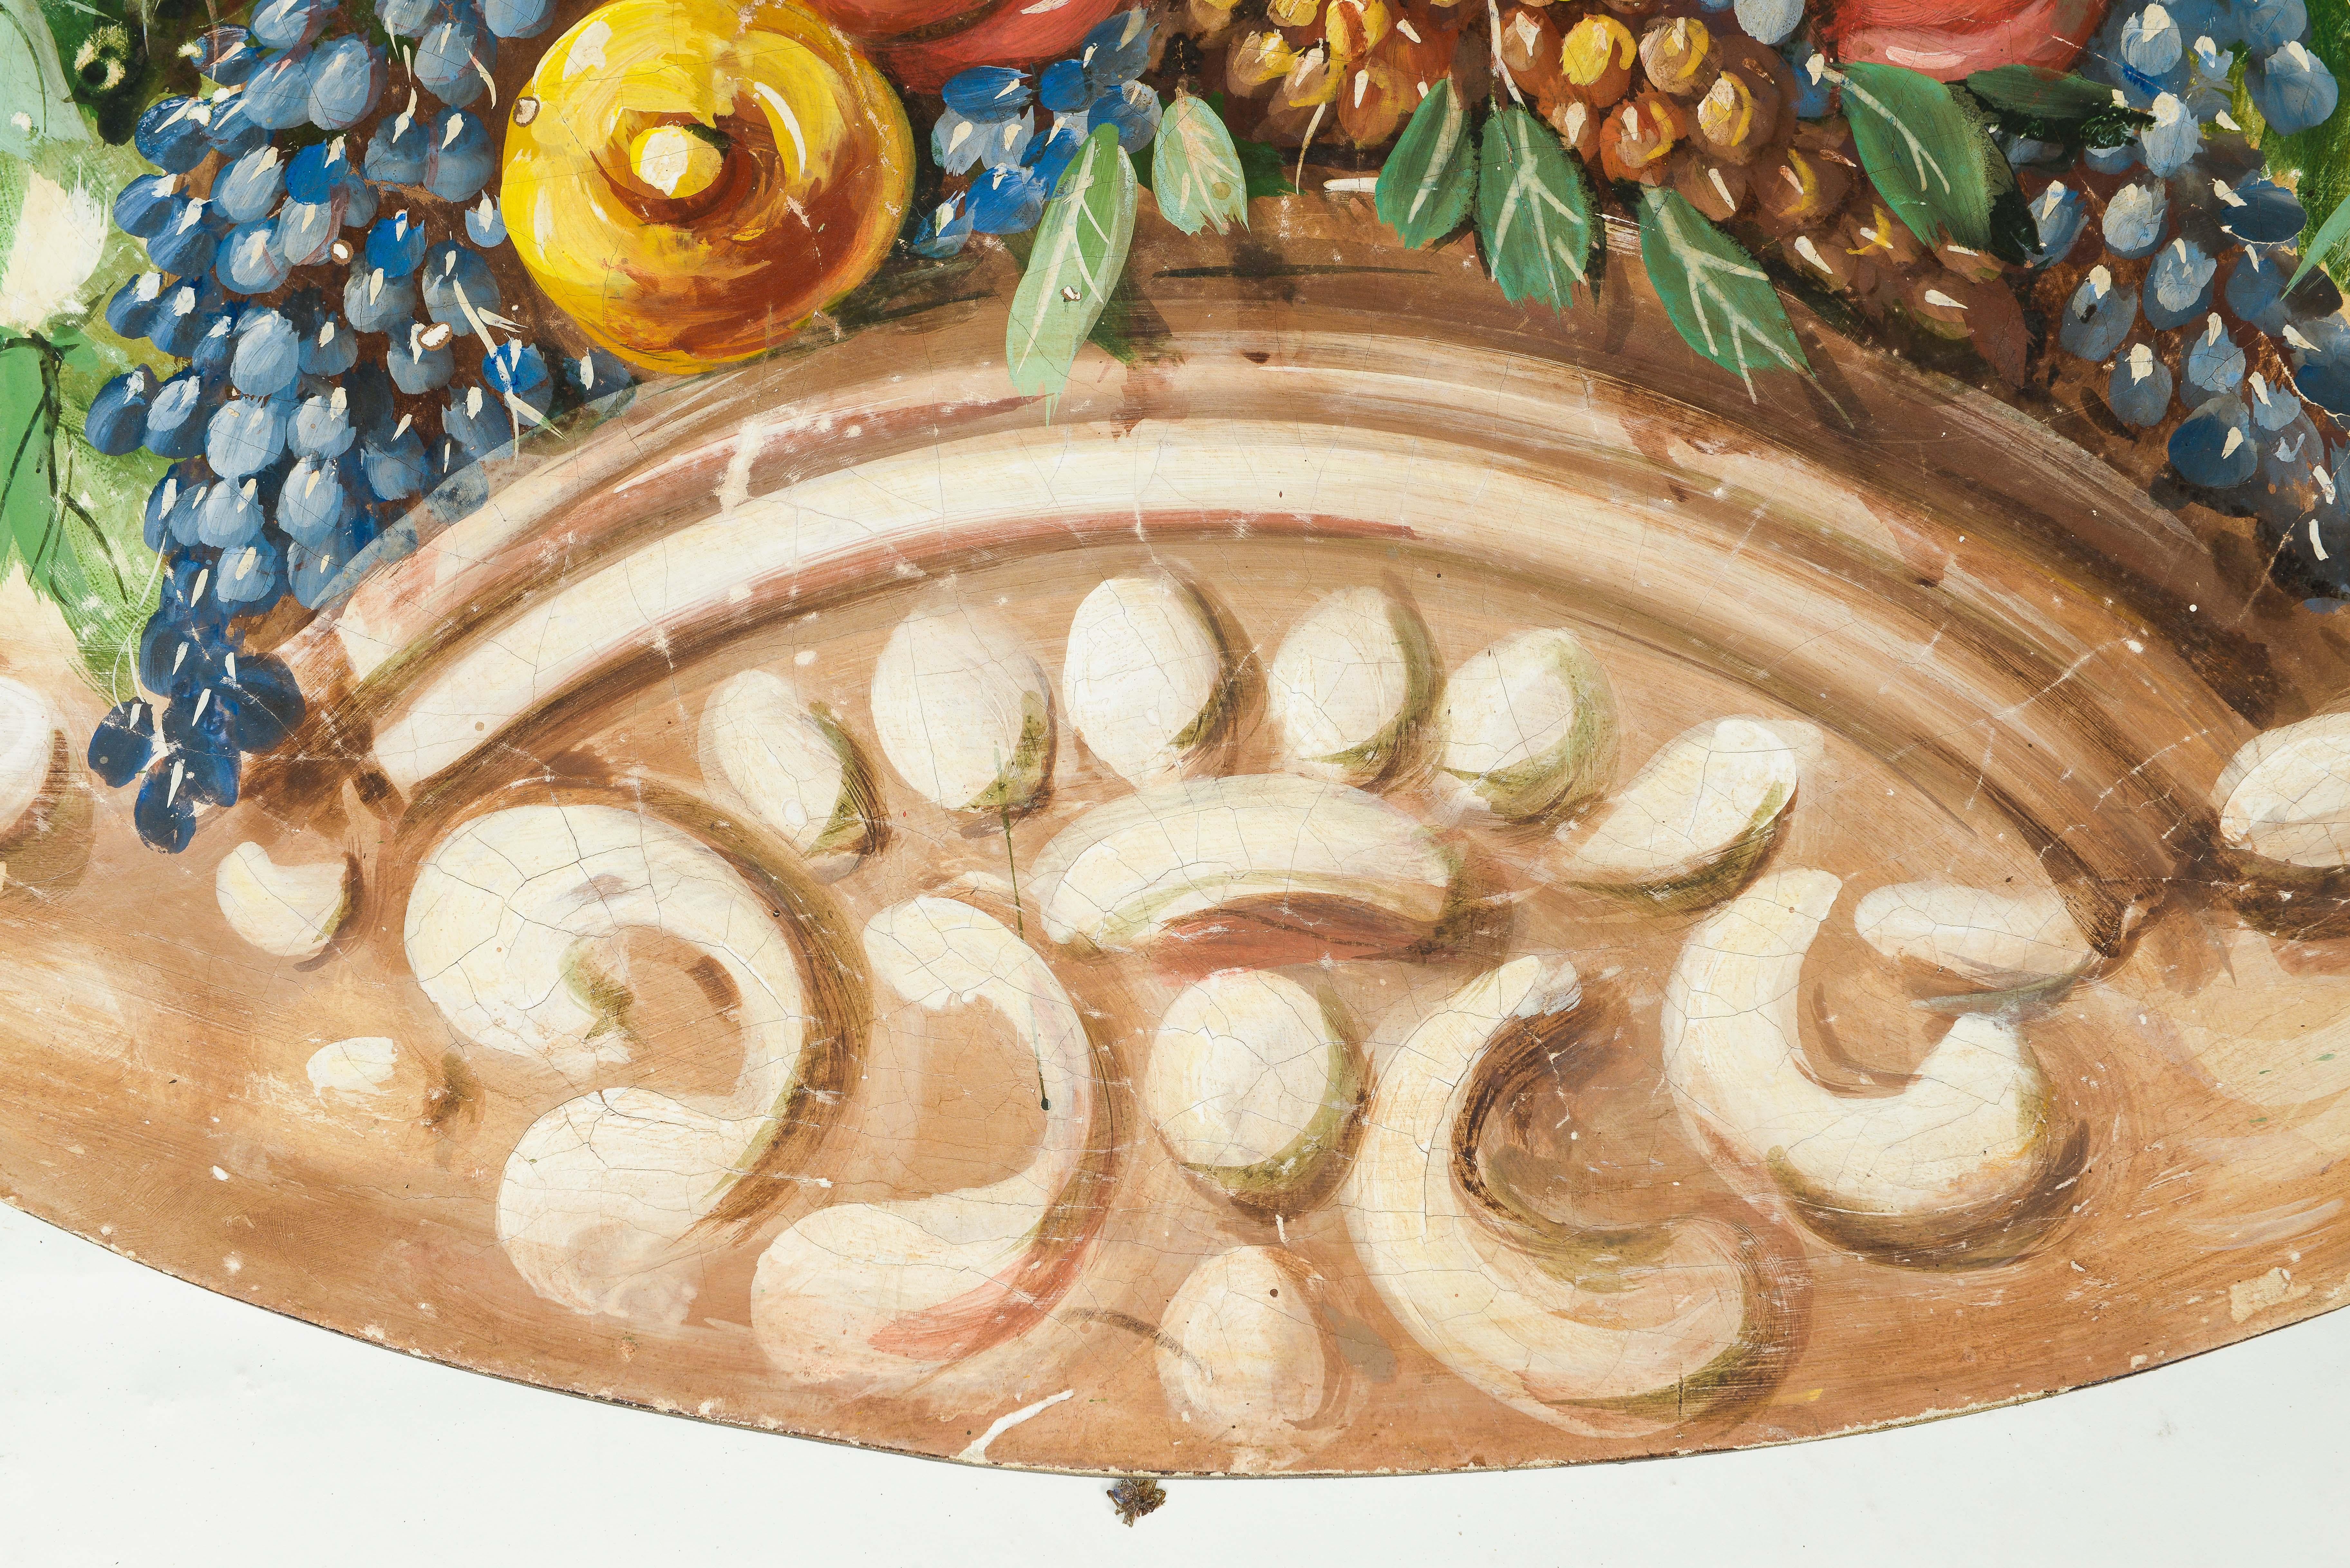 Depicting an abundant collection of grapes, apples, lemons and more set on a ledge within a rococo cartouche. Designed to be looked at from below.